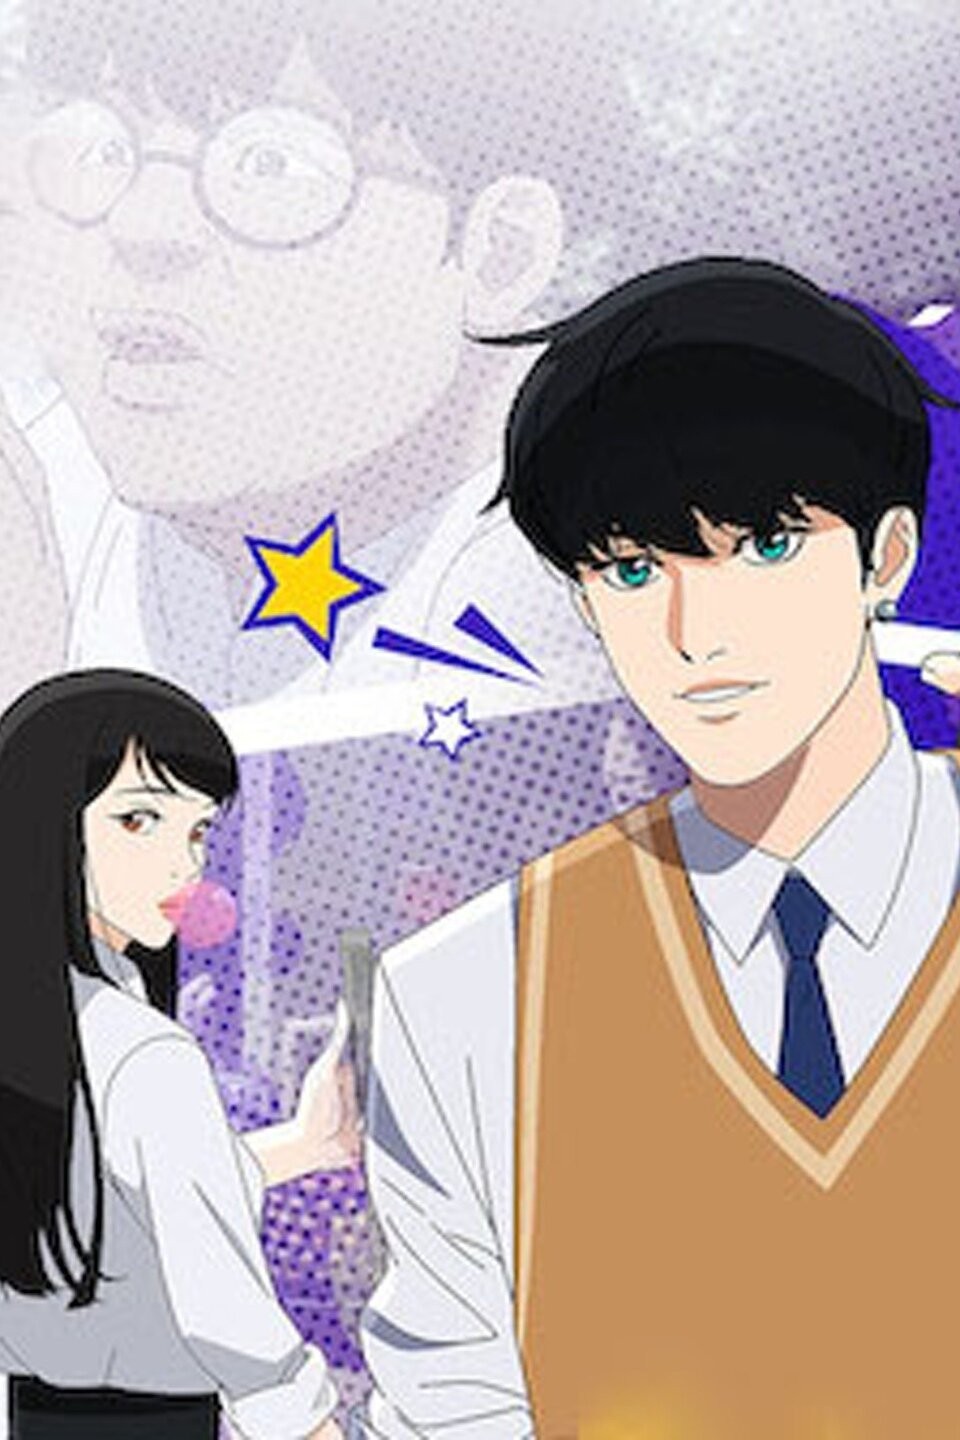 Lookism S01 E04 Hindi Episode  MOM  Lookism Anime in Hindi  Full Episode   NKS AZ   video Dailymotion